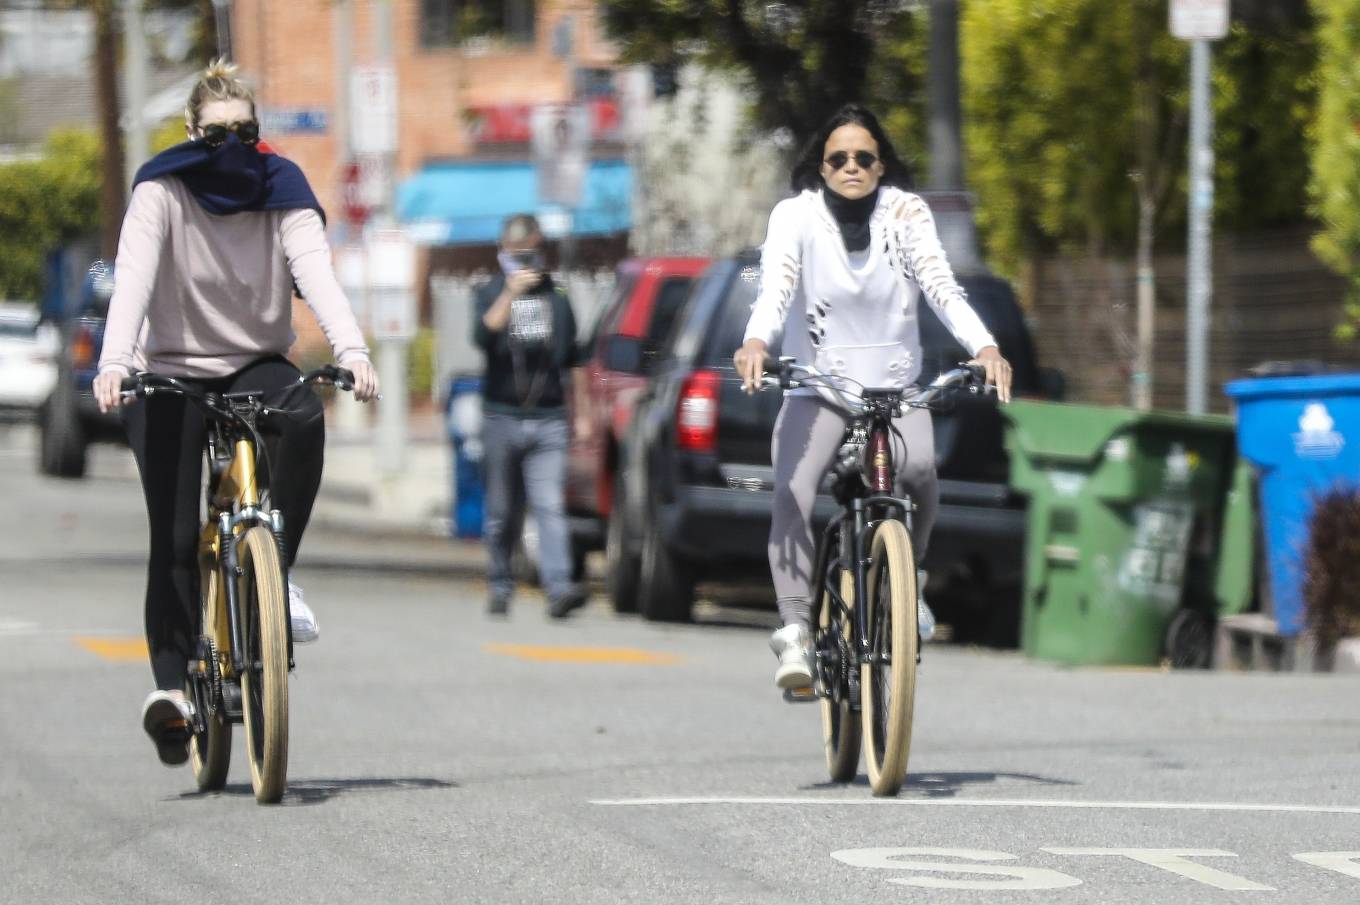 Michelle Rodriguez â€“ Rides a bike during COVID-19 pandemic in Los Angeles